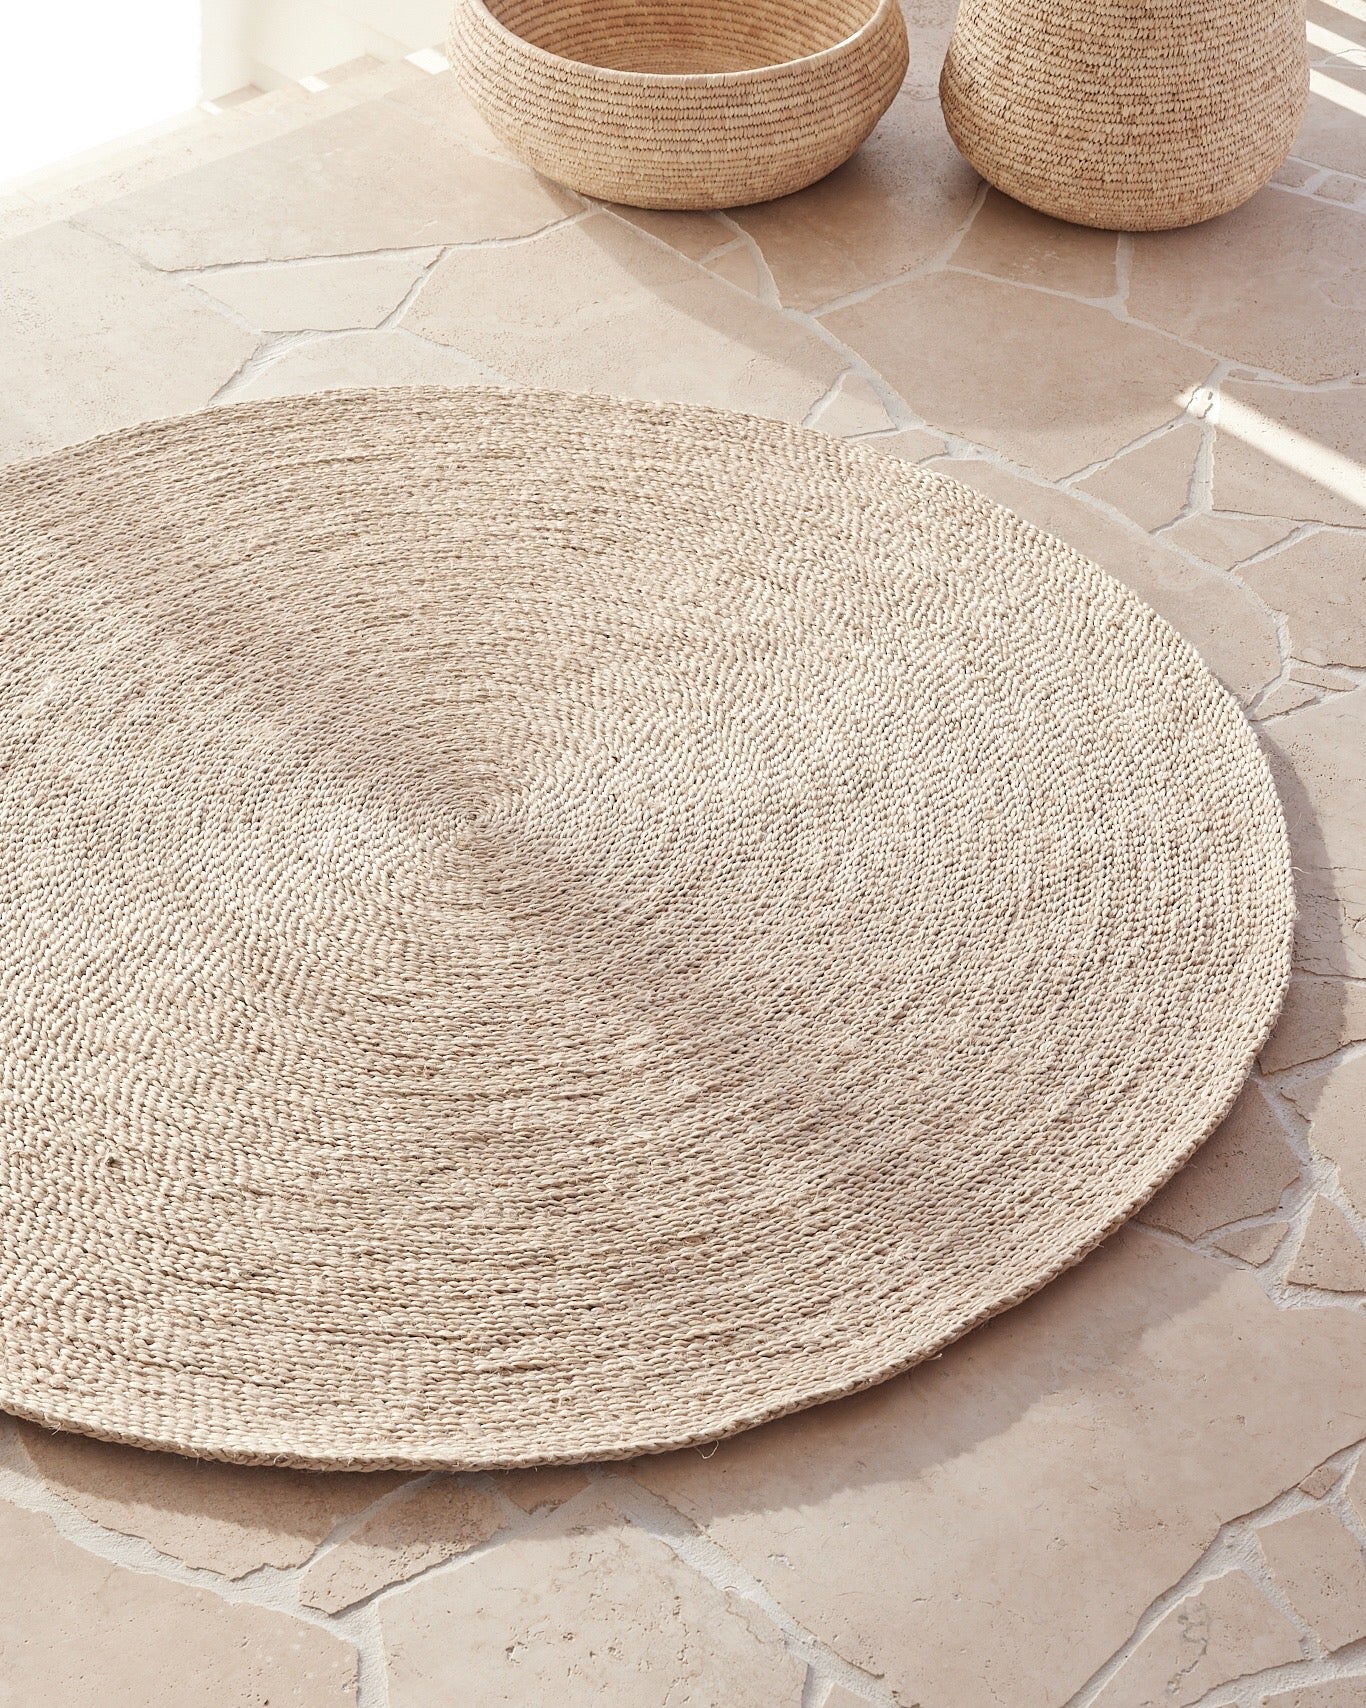 handwoven round jute rug on crazy paving